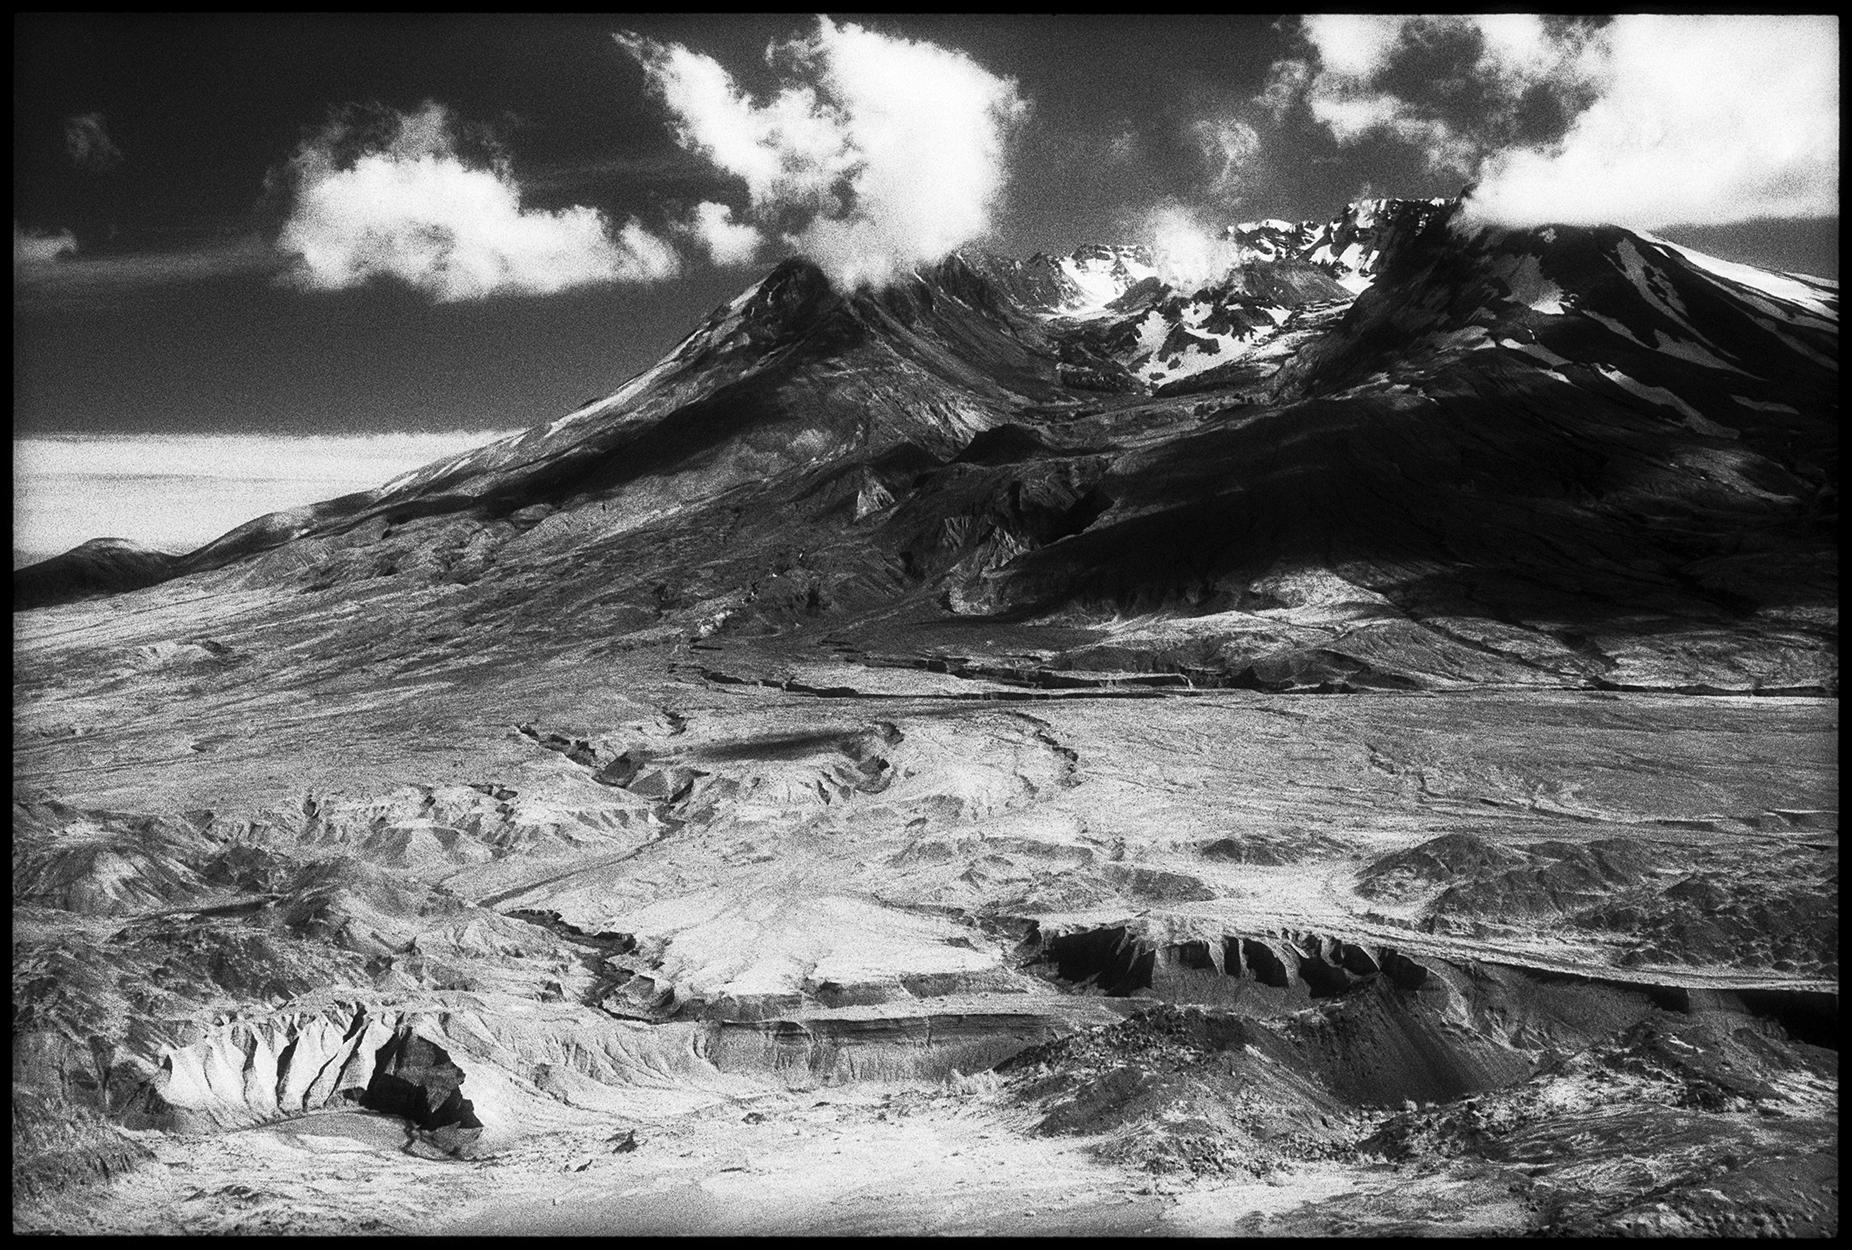 Edward Alfano Black and White Photograph - Mount St. Helens - Black & White Infrared Photograph of the Rocky Mountains